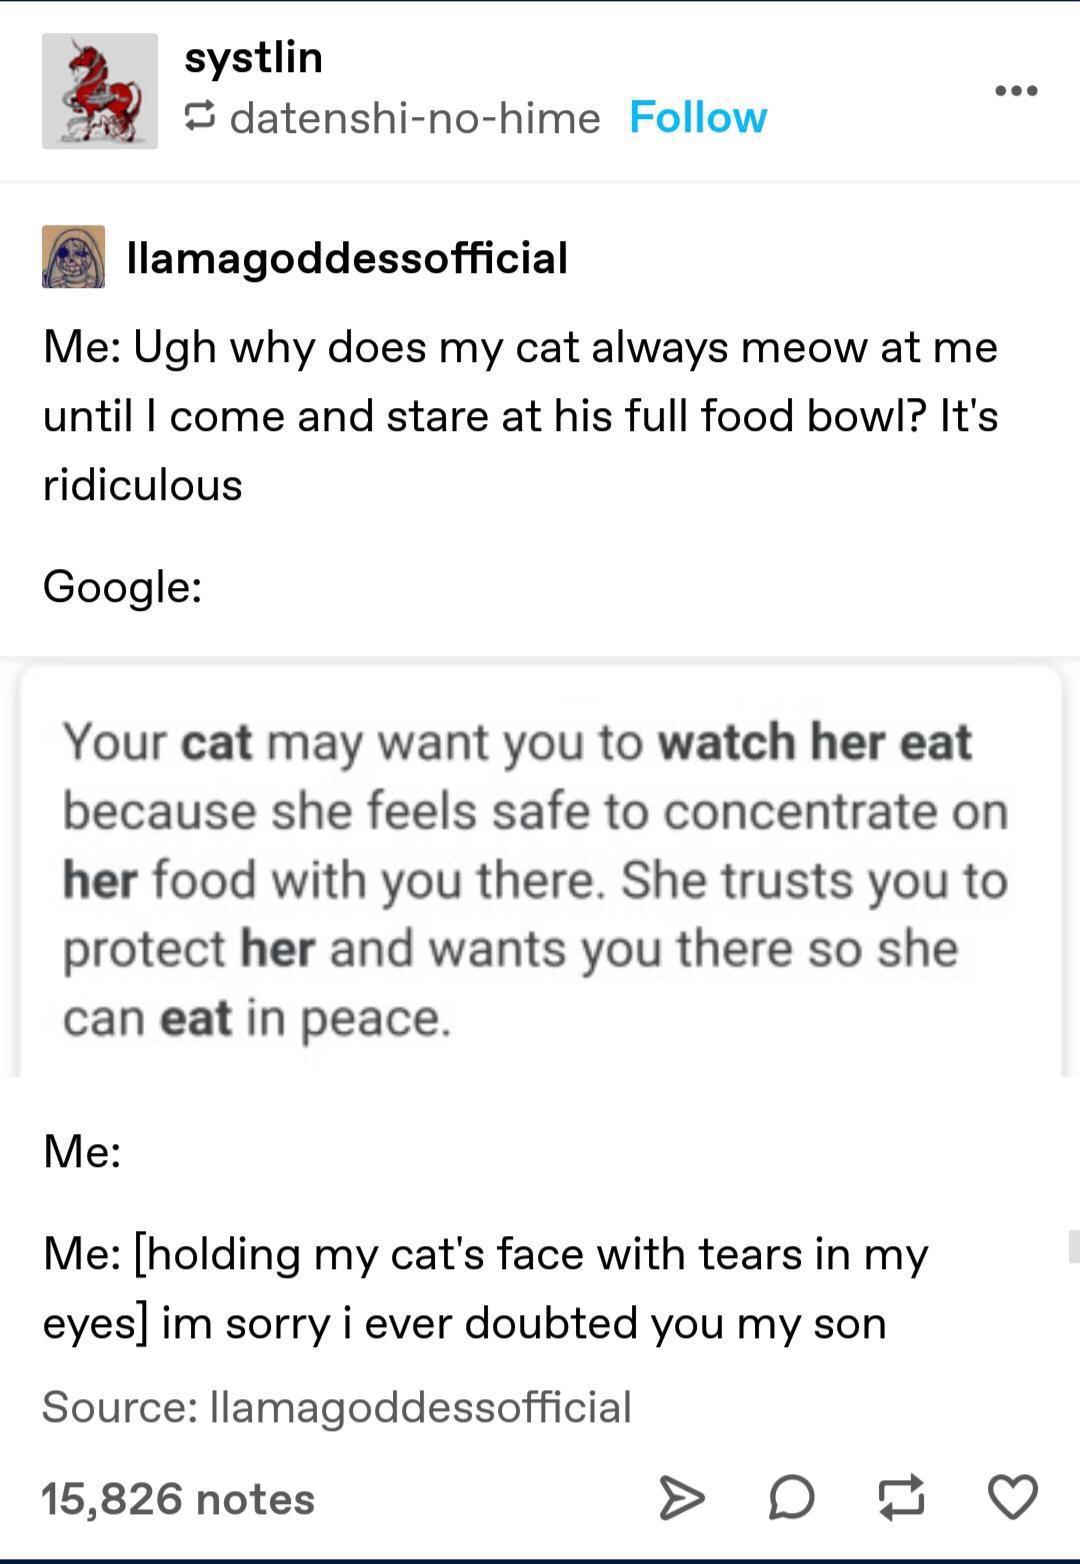 funny and random pics - document - systlin datenshinohime llamagoddessofficial Me Ugh why does my cat always meow at me until I come and stare at his full food bowl? It's ridiculous Google Me Your cat may want you to watch her eat because she feels safe t